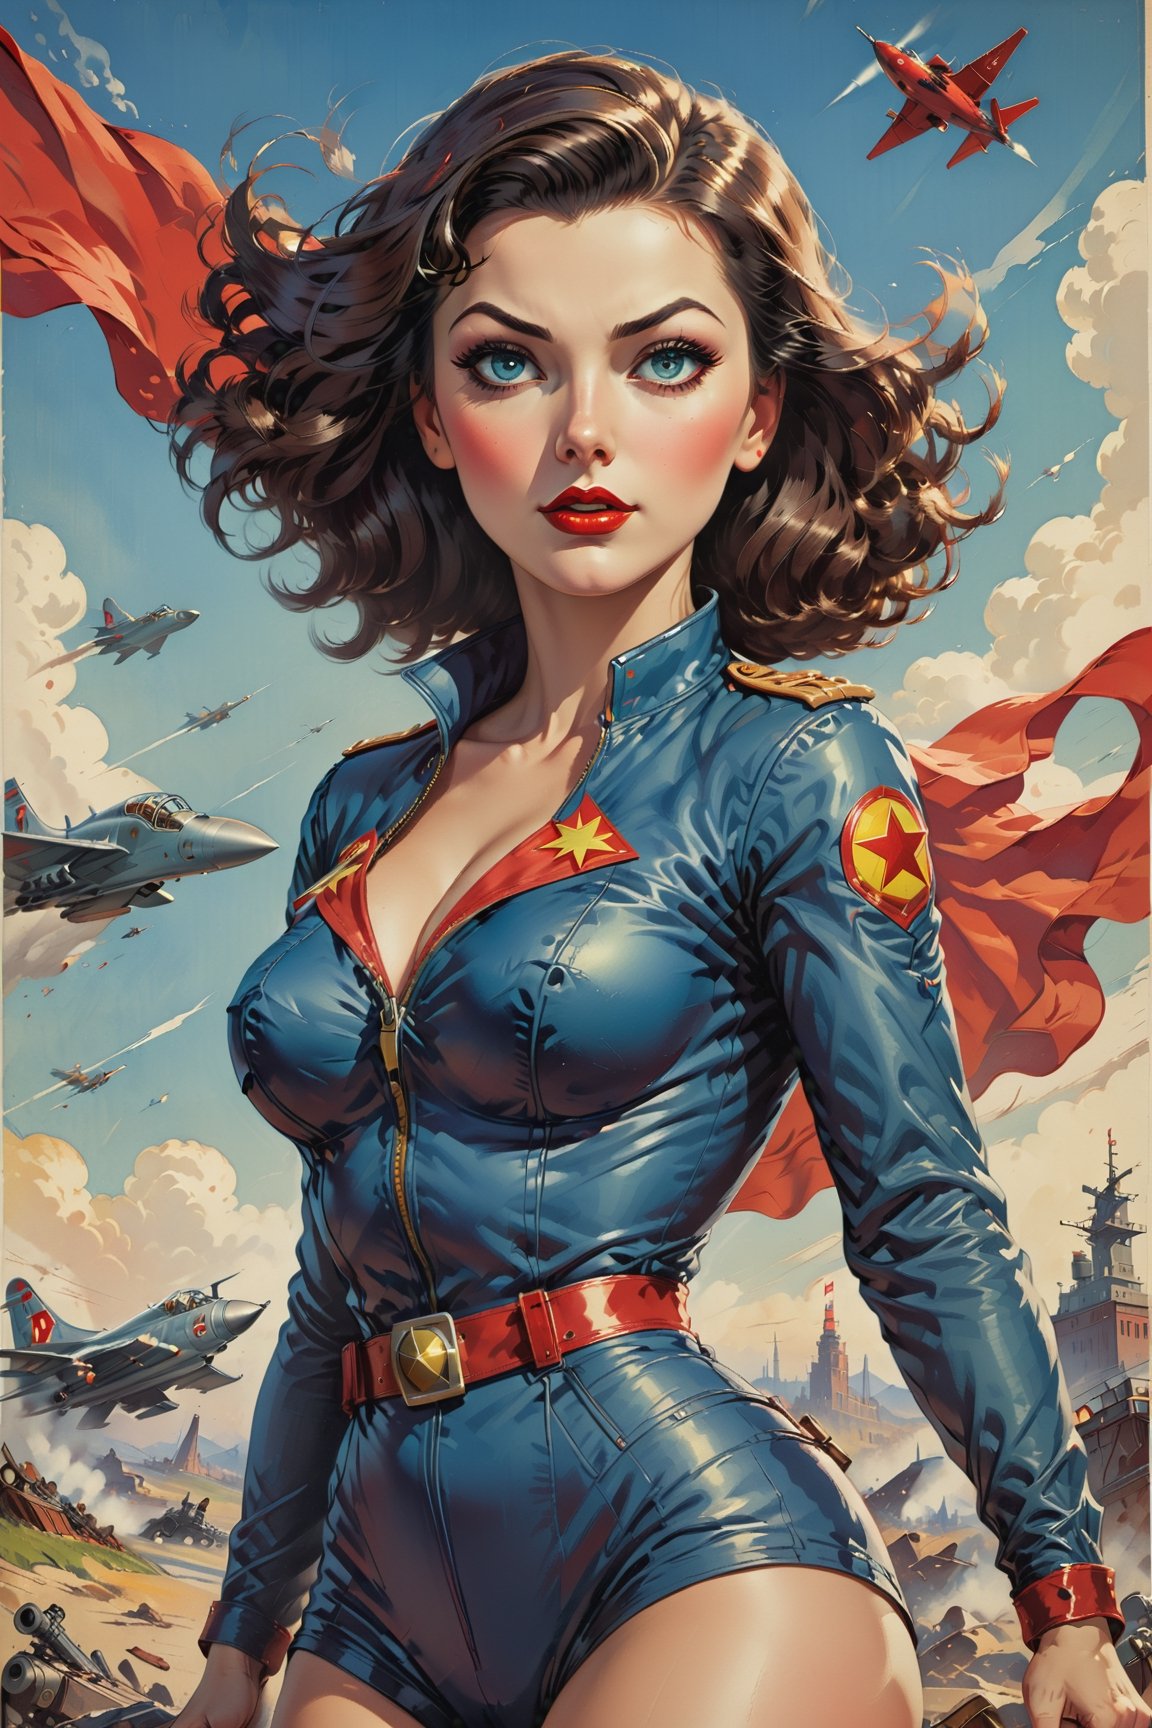 American World War II poster, Gil Elvgren style ((CCCP poster, Soviet poster)) (a medium-sized dark-haired woman with superhero outfit) Poster propaganda, poster, blue sky with fighter jet, hero uniform, 1girl, solo, good body, poster design, poster art style. 1980s, 1950s, 1960s, 1940s, basic color scheme, very colorful poster, colorful art, third rule, inspiring, woman, 1 mature girl, hair blowing in the wind, looking at the viewer, revolutionary, red and blue square background, thick legs, green eyes,Comic Book-Style 2d,